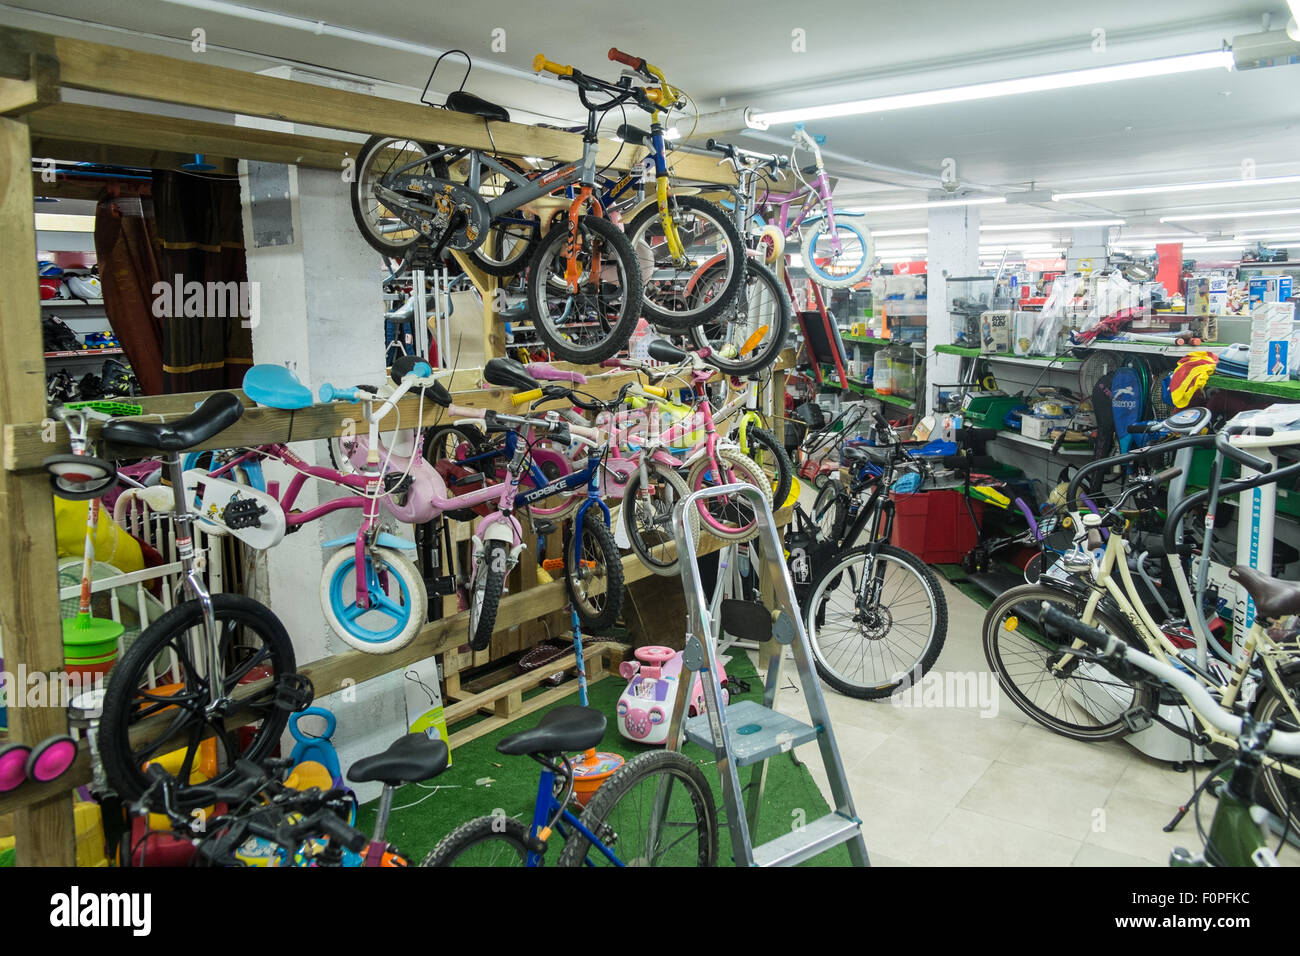 Bicycles,bikes,Second hand goods for sale at this